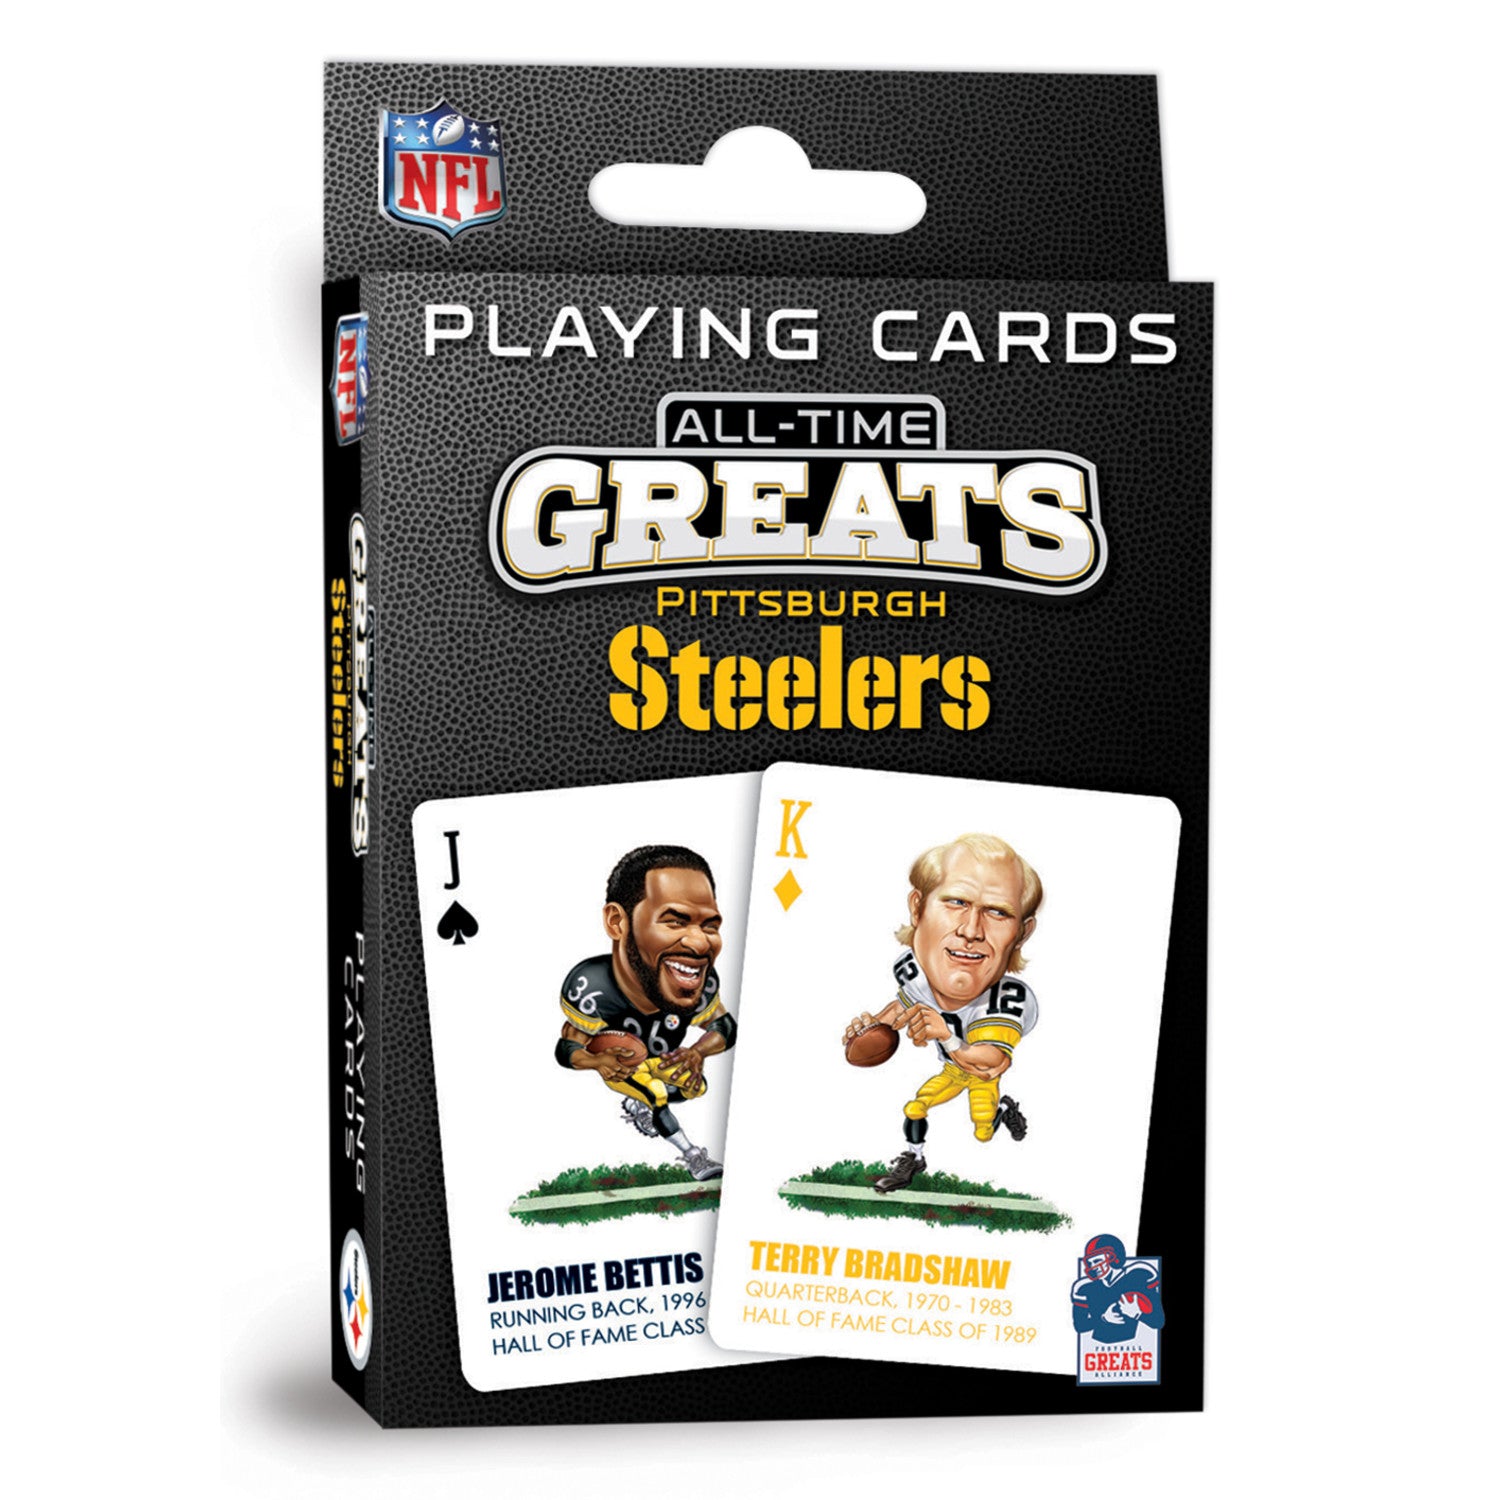 Pittsburgh Steelers All-Time Greats Playing Cards - 54 Card Deck